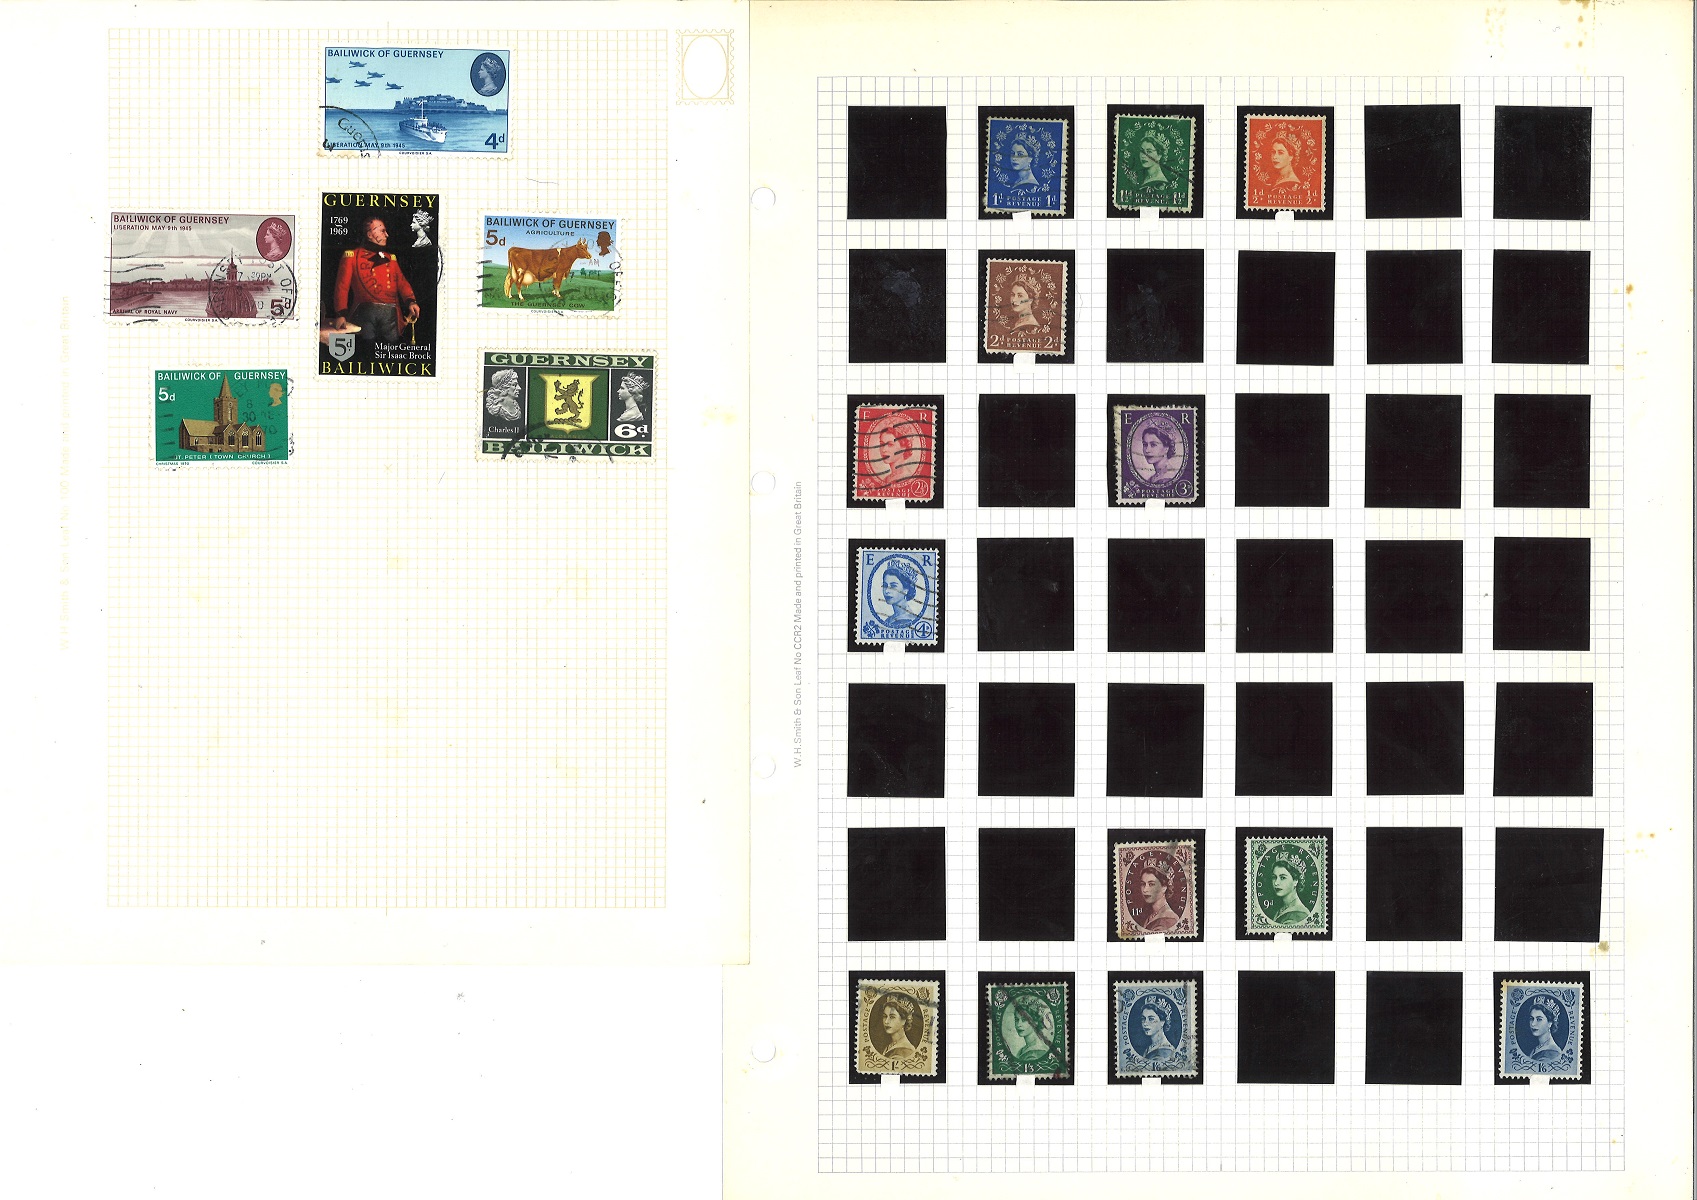 Glory folder. Includes FDI cover which includes coin. Sheets of stamps from Jersey, Guernsey, and - Image 2 of 5